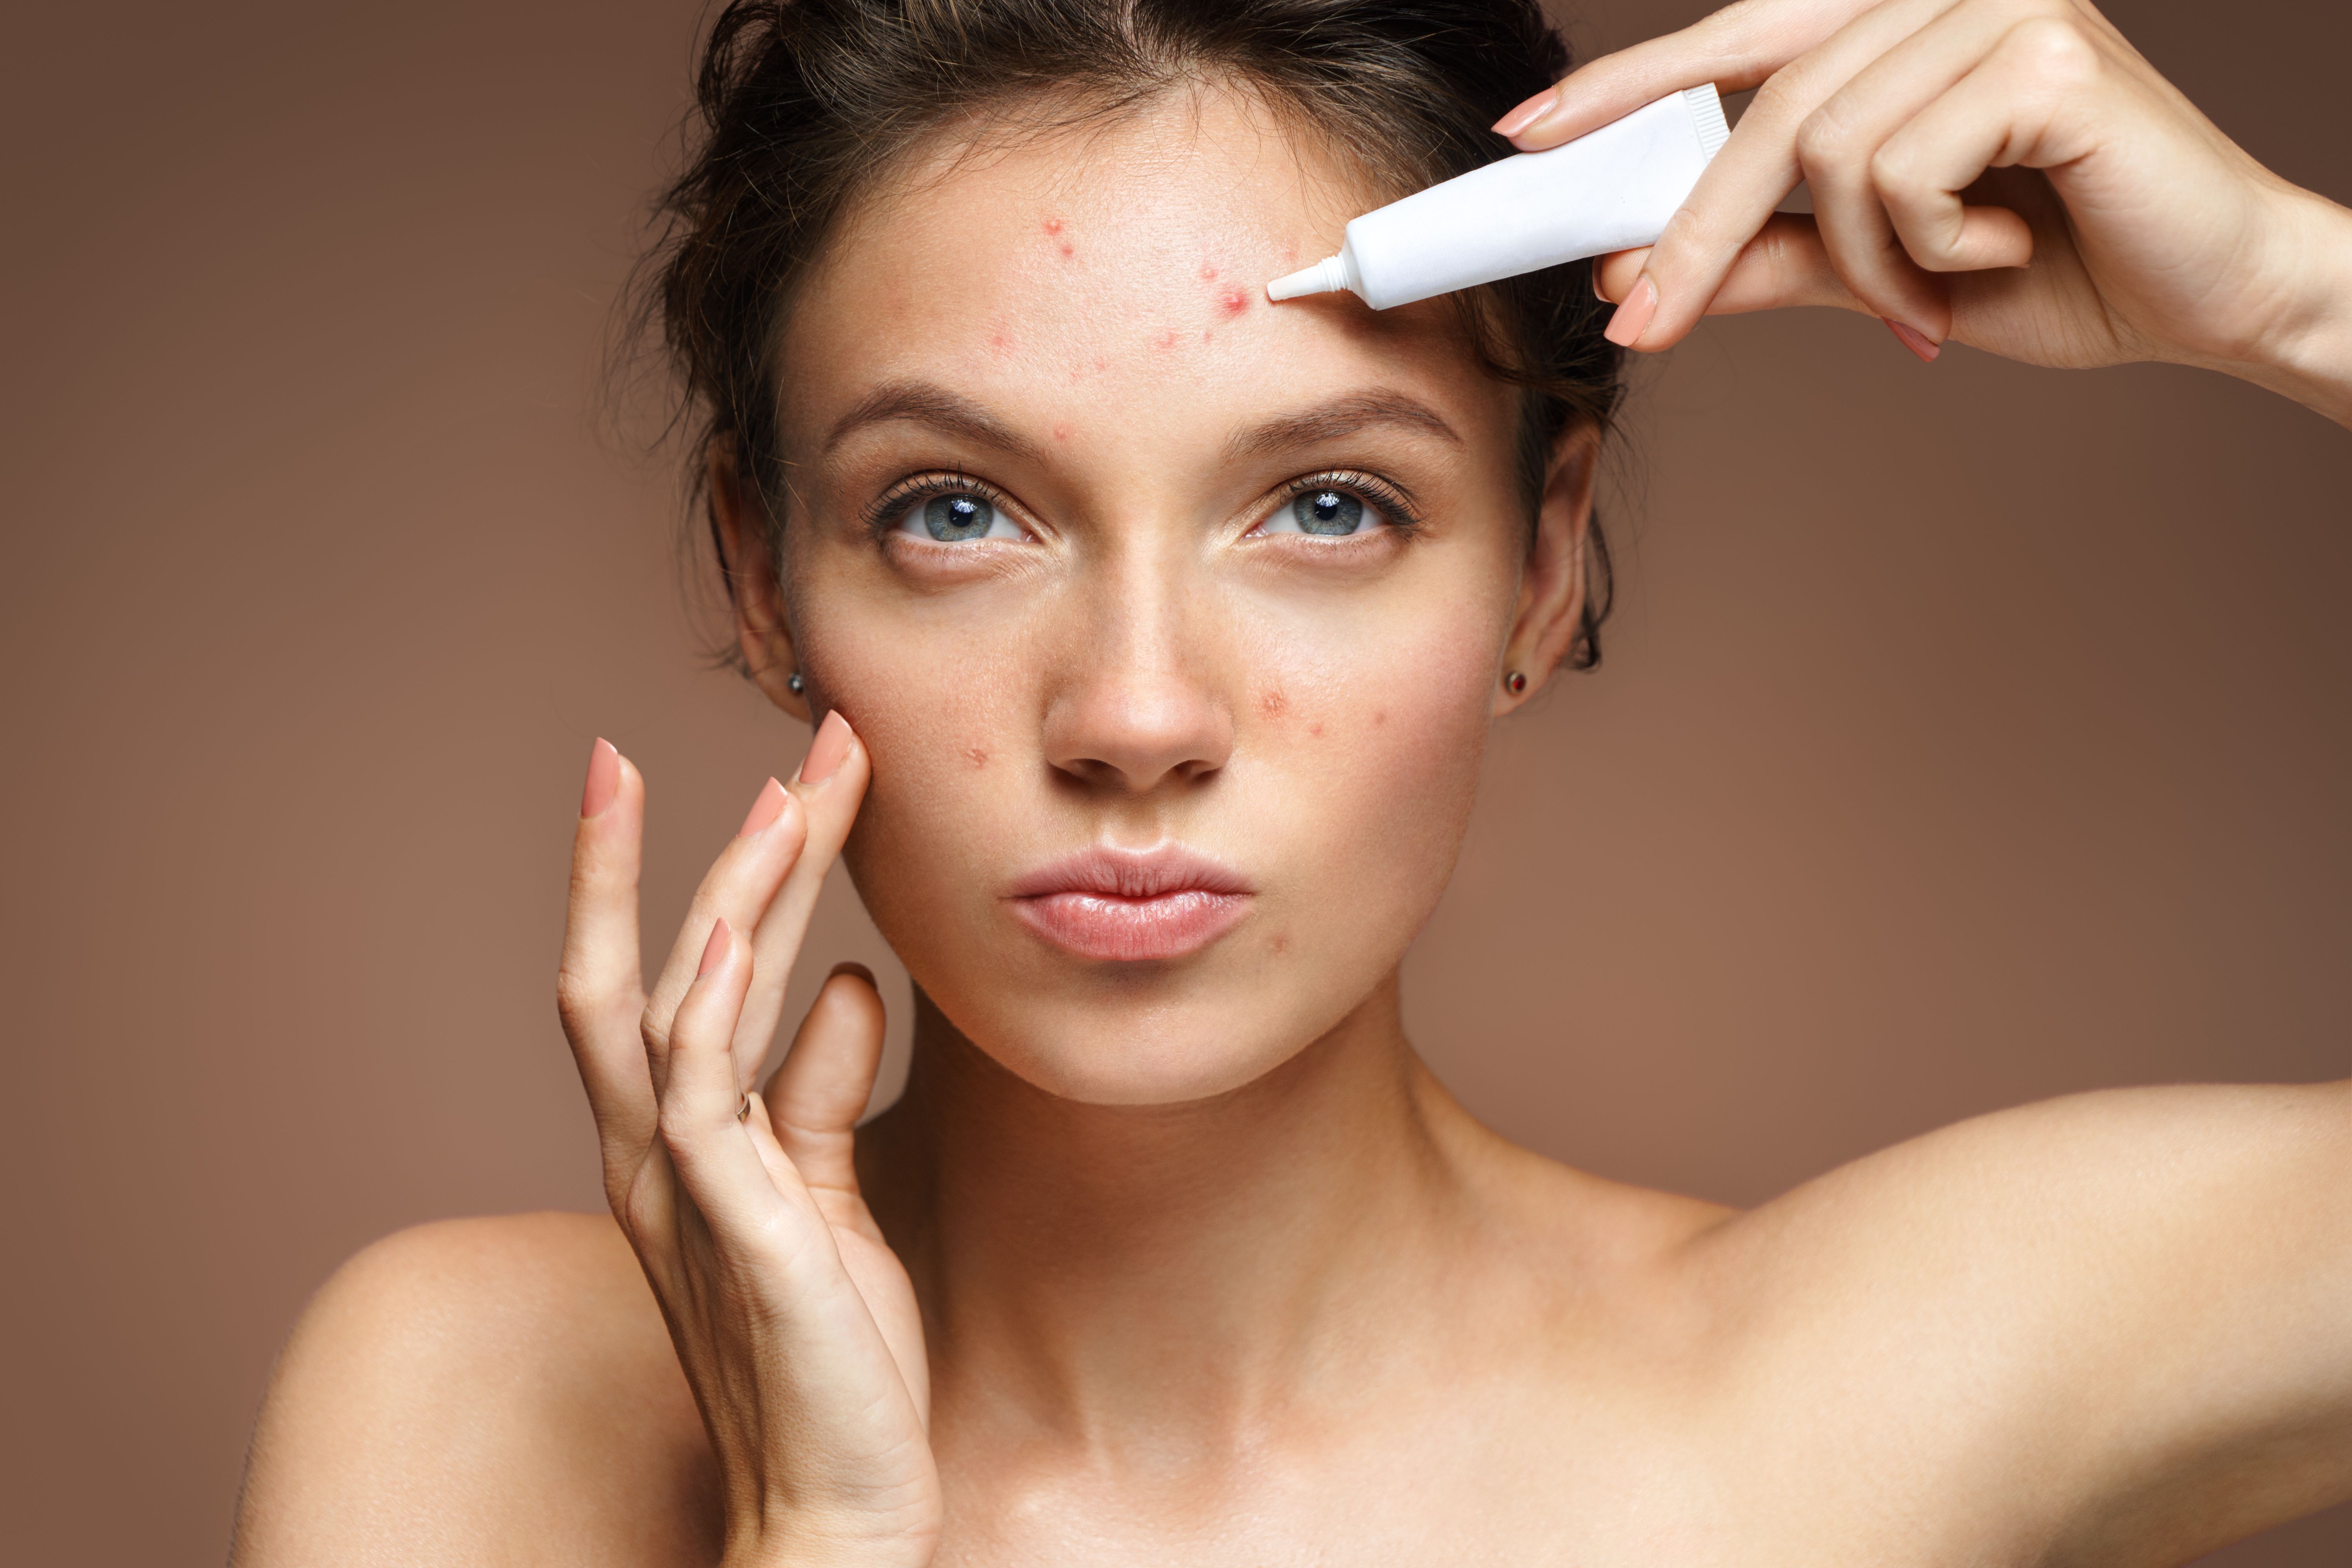 Young woman applies topical treatment to her forehead acne. 